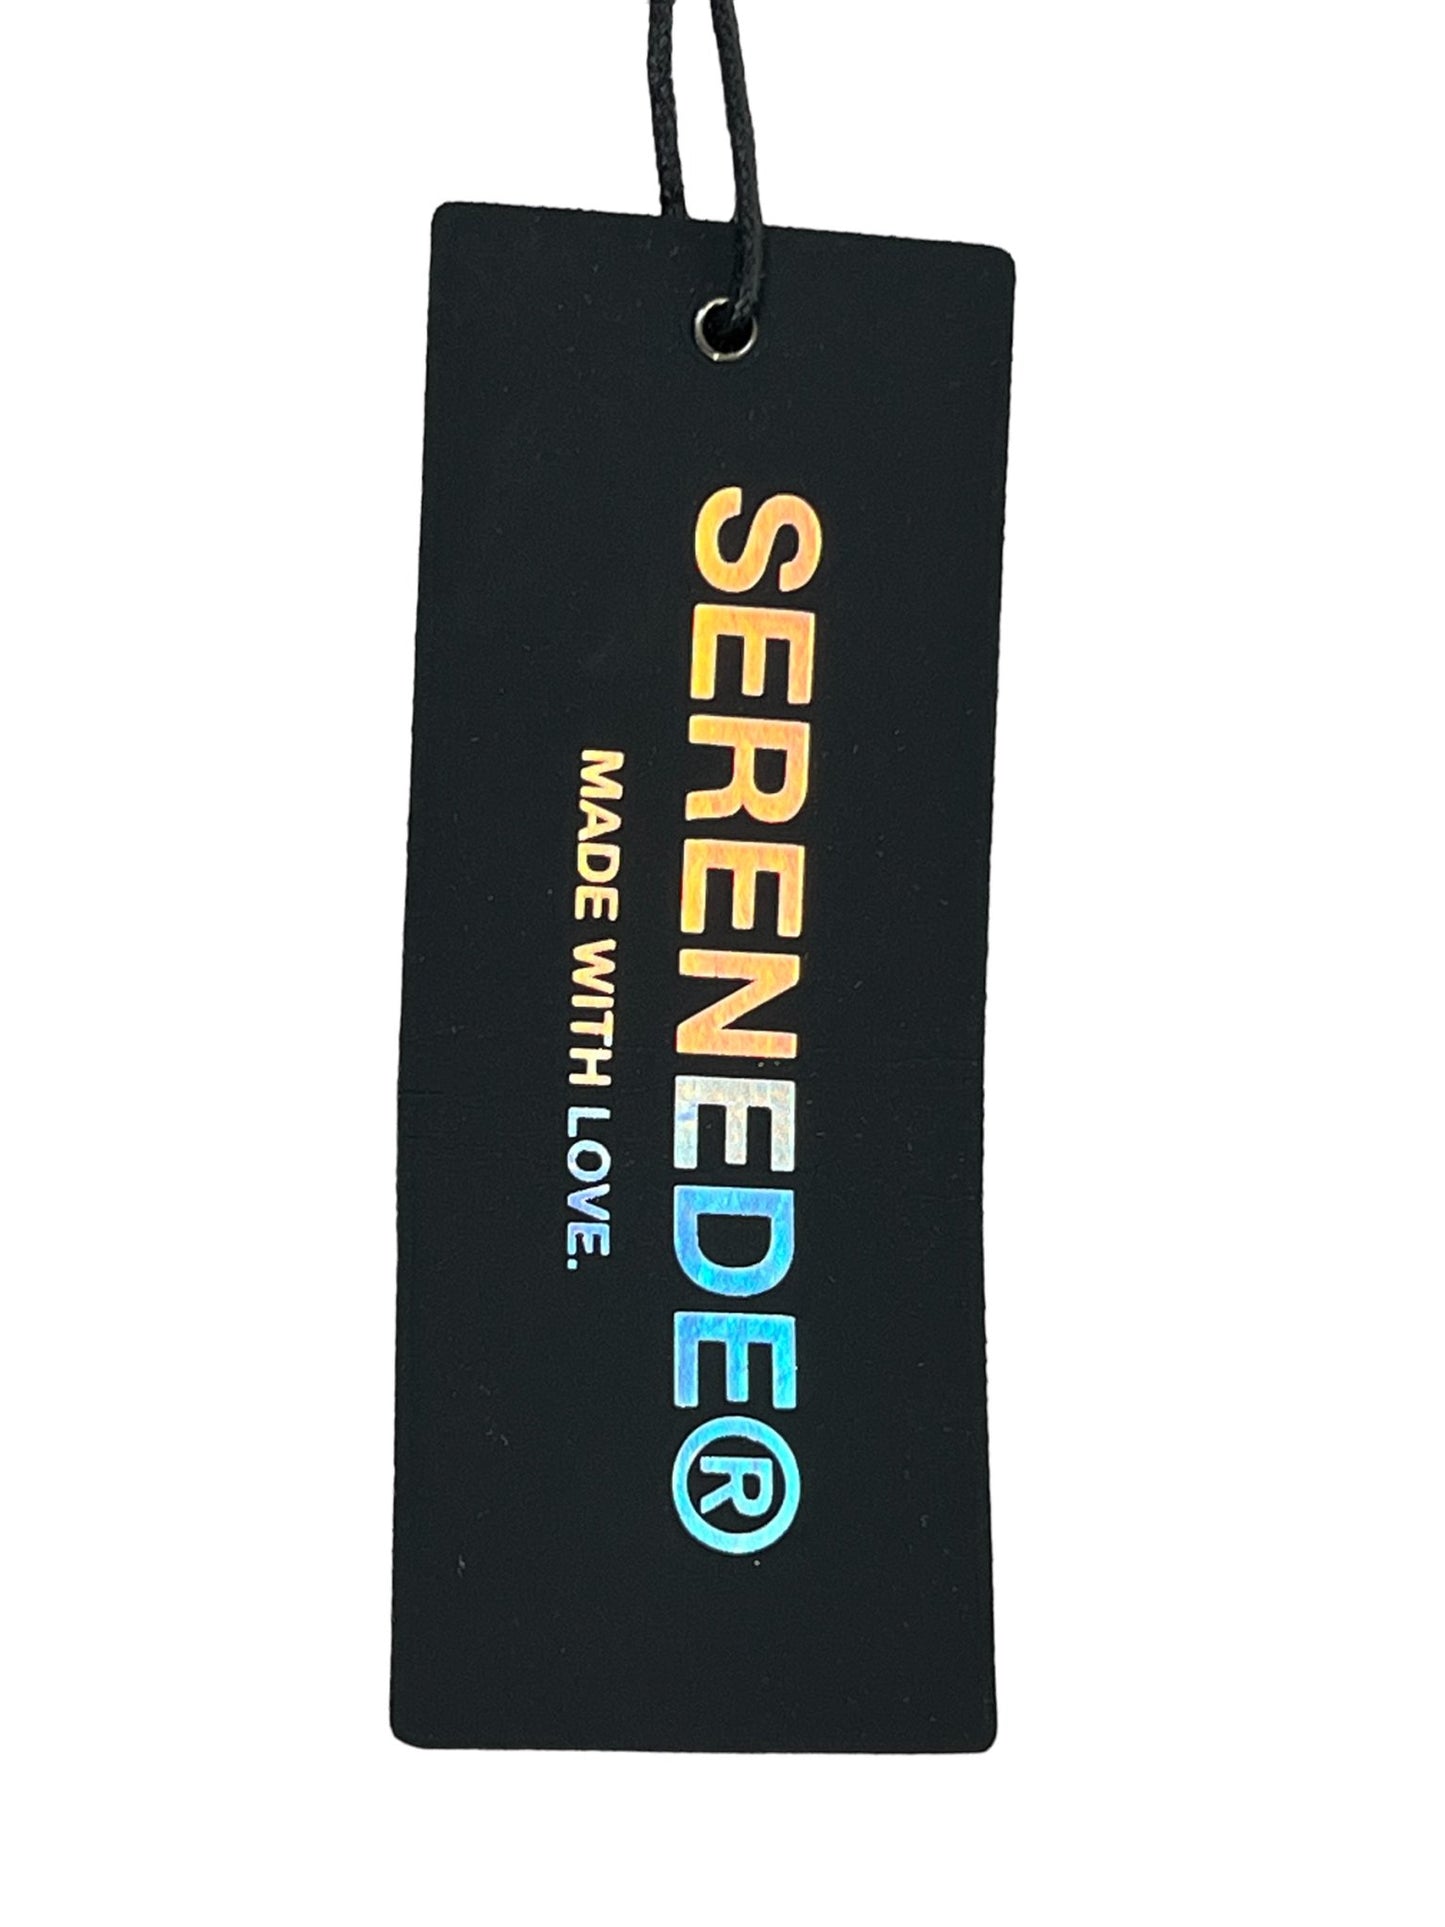 Black SERENEDE TITAN JEANS GREY tag with the brand name "SERENEDE" and the phrase "made with love" in yellow and blue text.